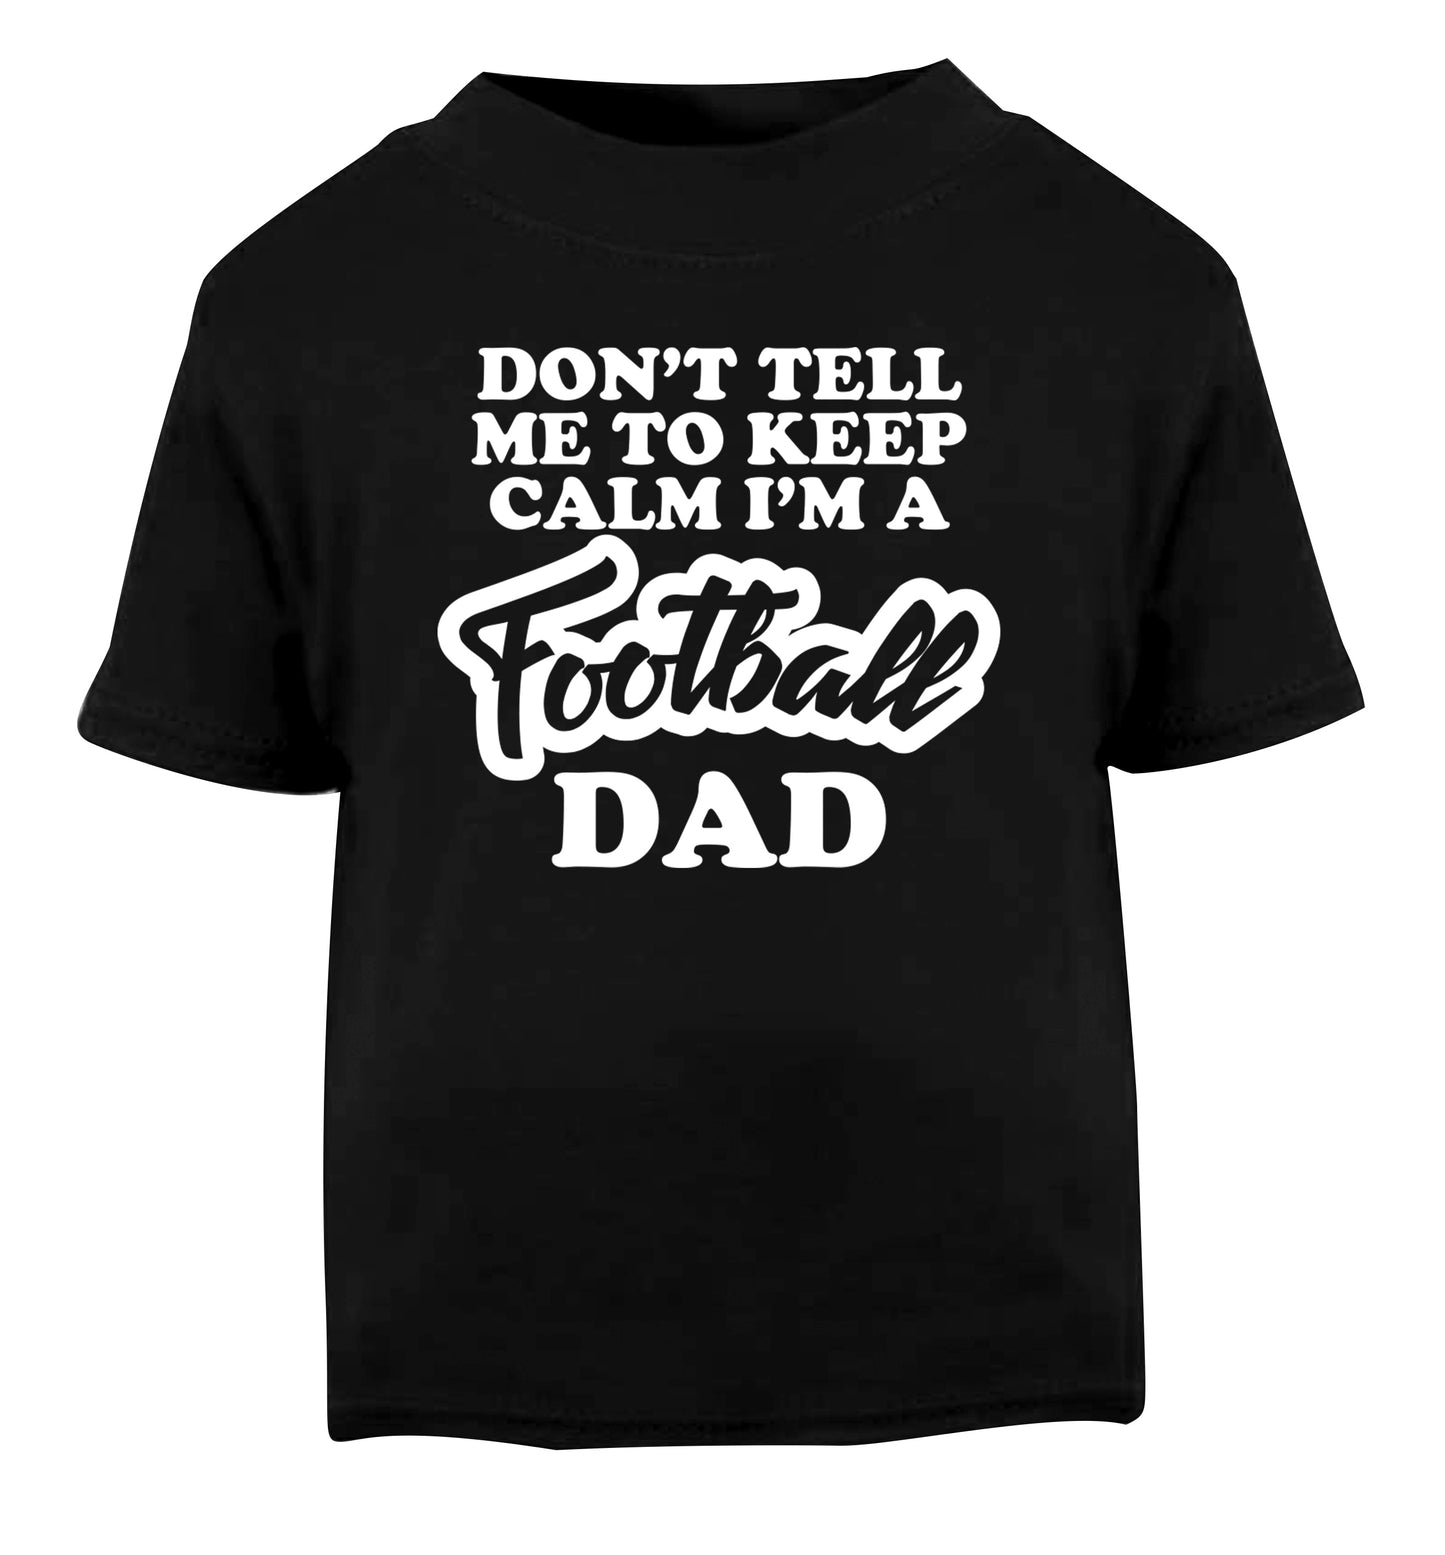 Don't tell me to keep calm I'm a football dad Black Baby Toddler Tshirt 2 years